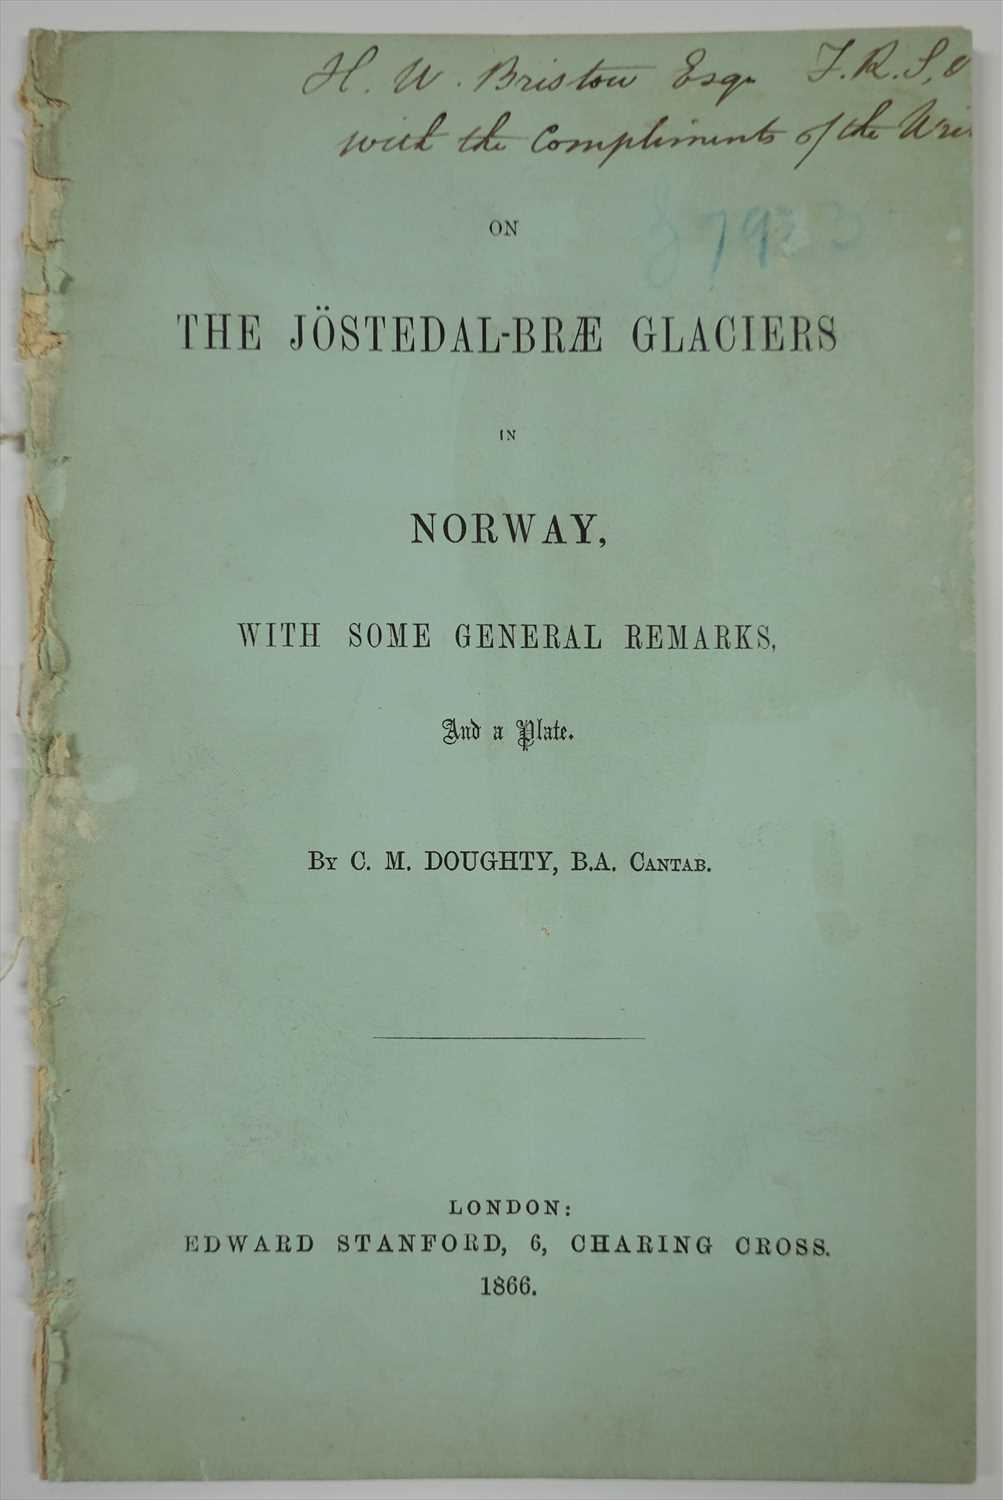 Lot 135 - Doughty (Charles Montagu). On the Jostedal Brae Glaciers in Norway, 1st edition, 1866